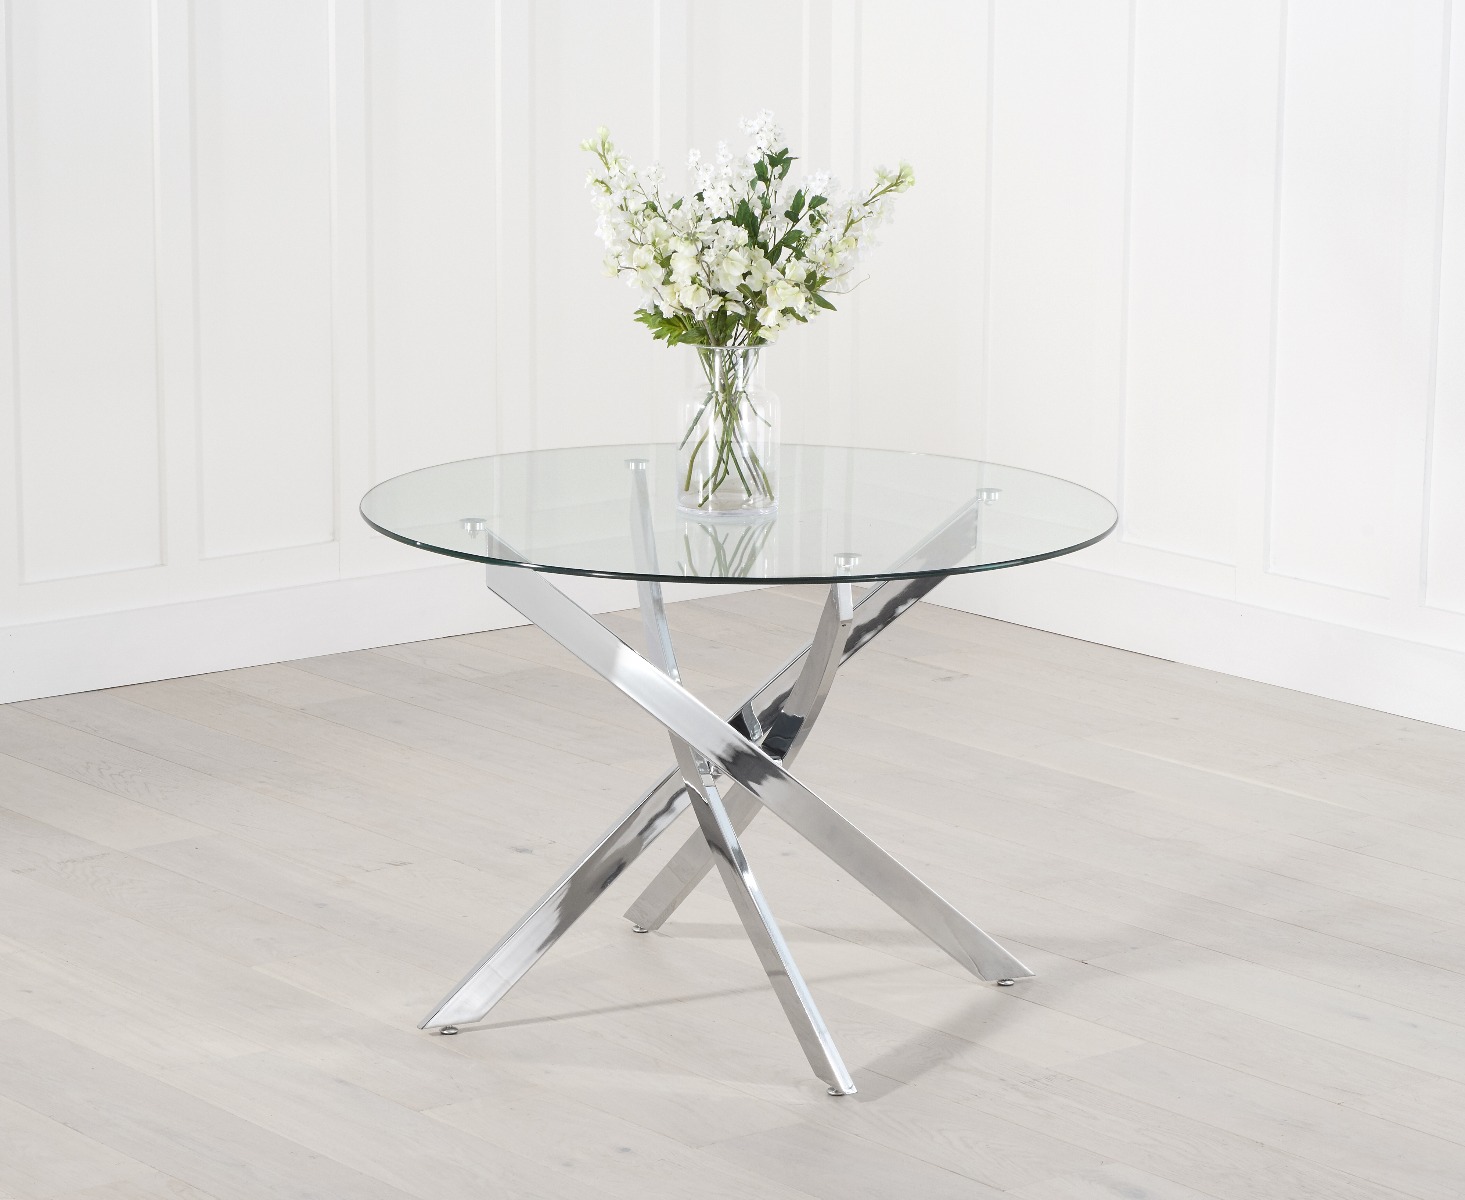 Photo 5 of Denver 110cm glass dining table with 4 grey vigo chairs